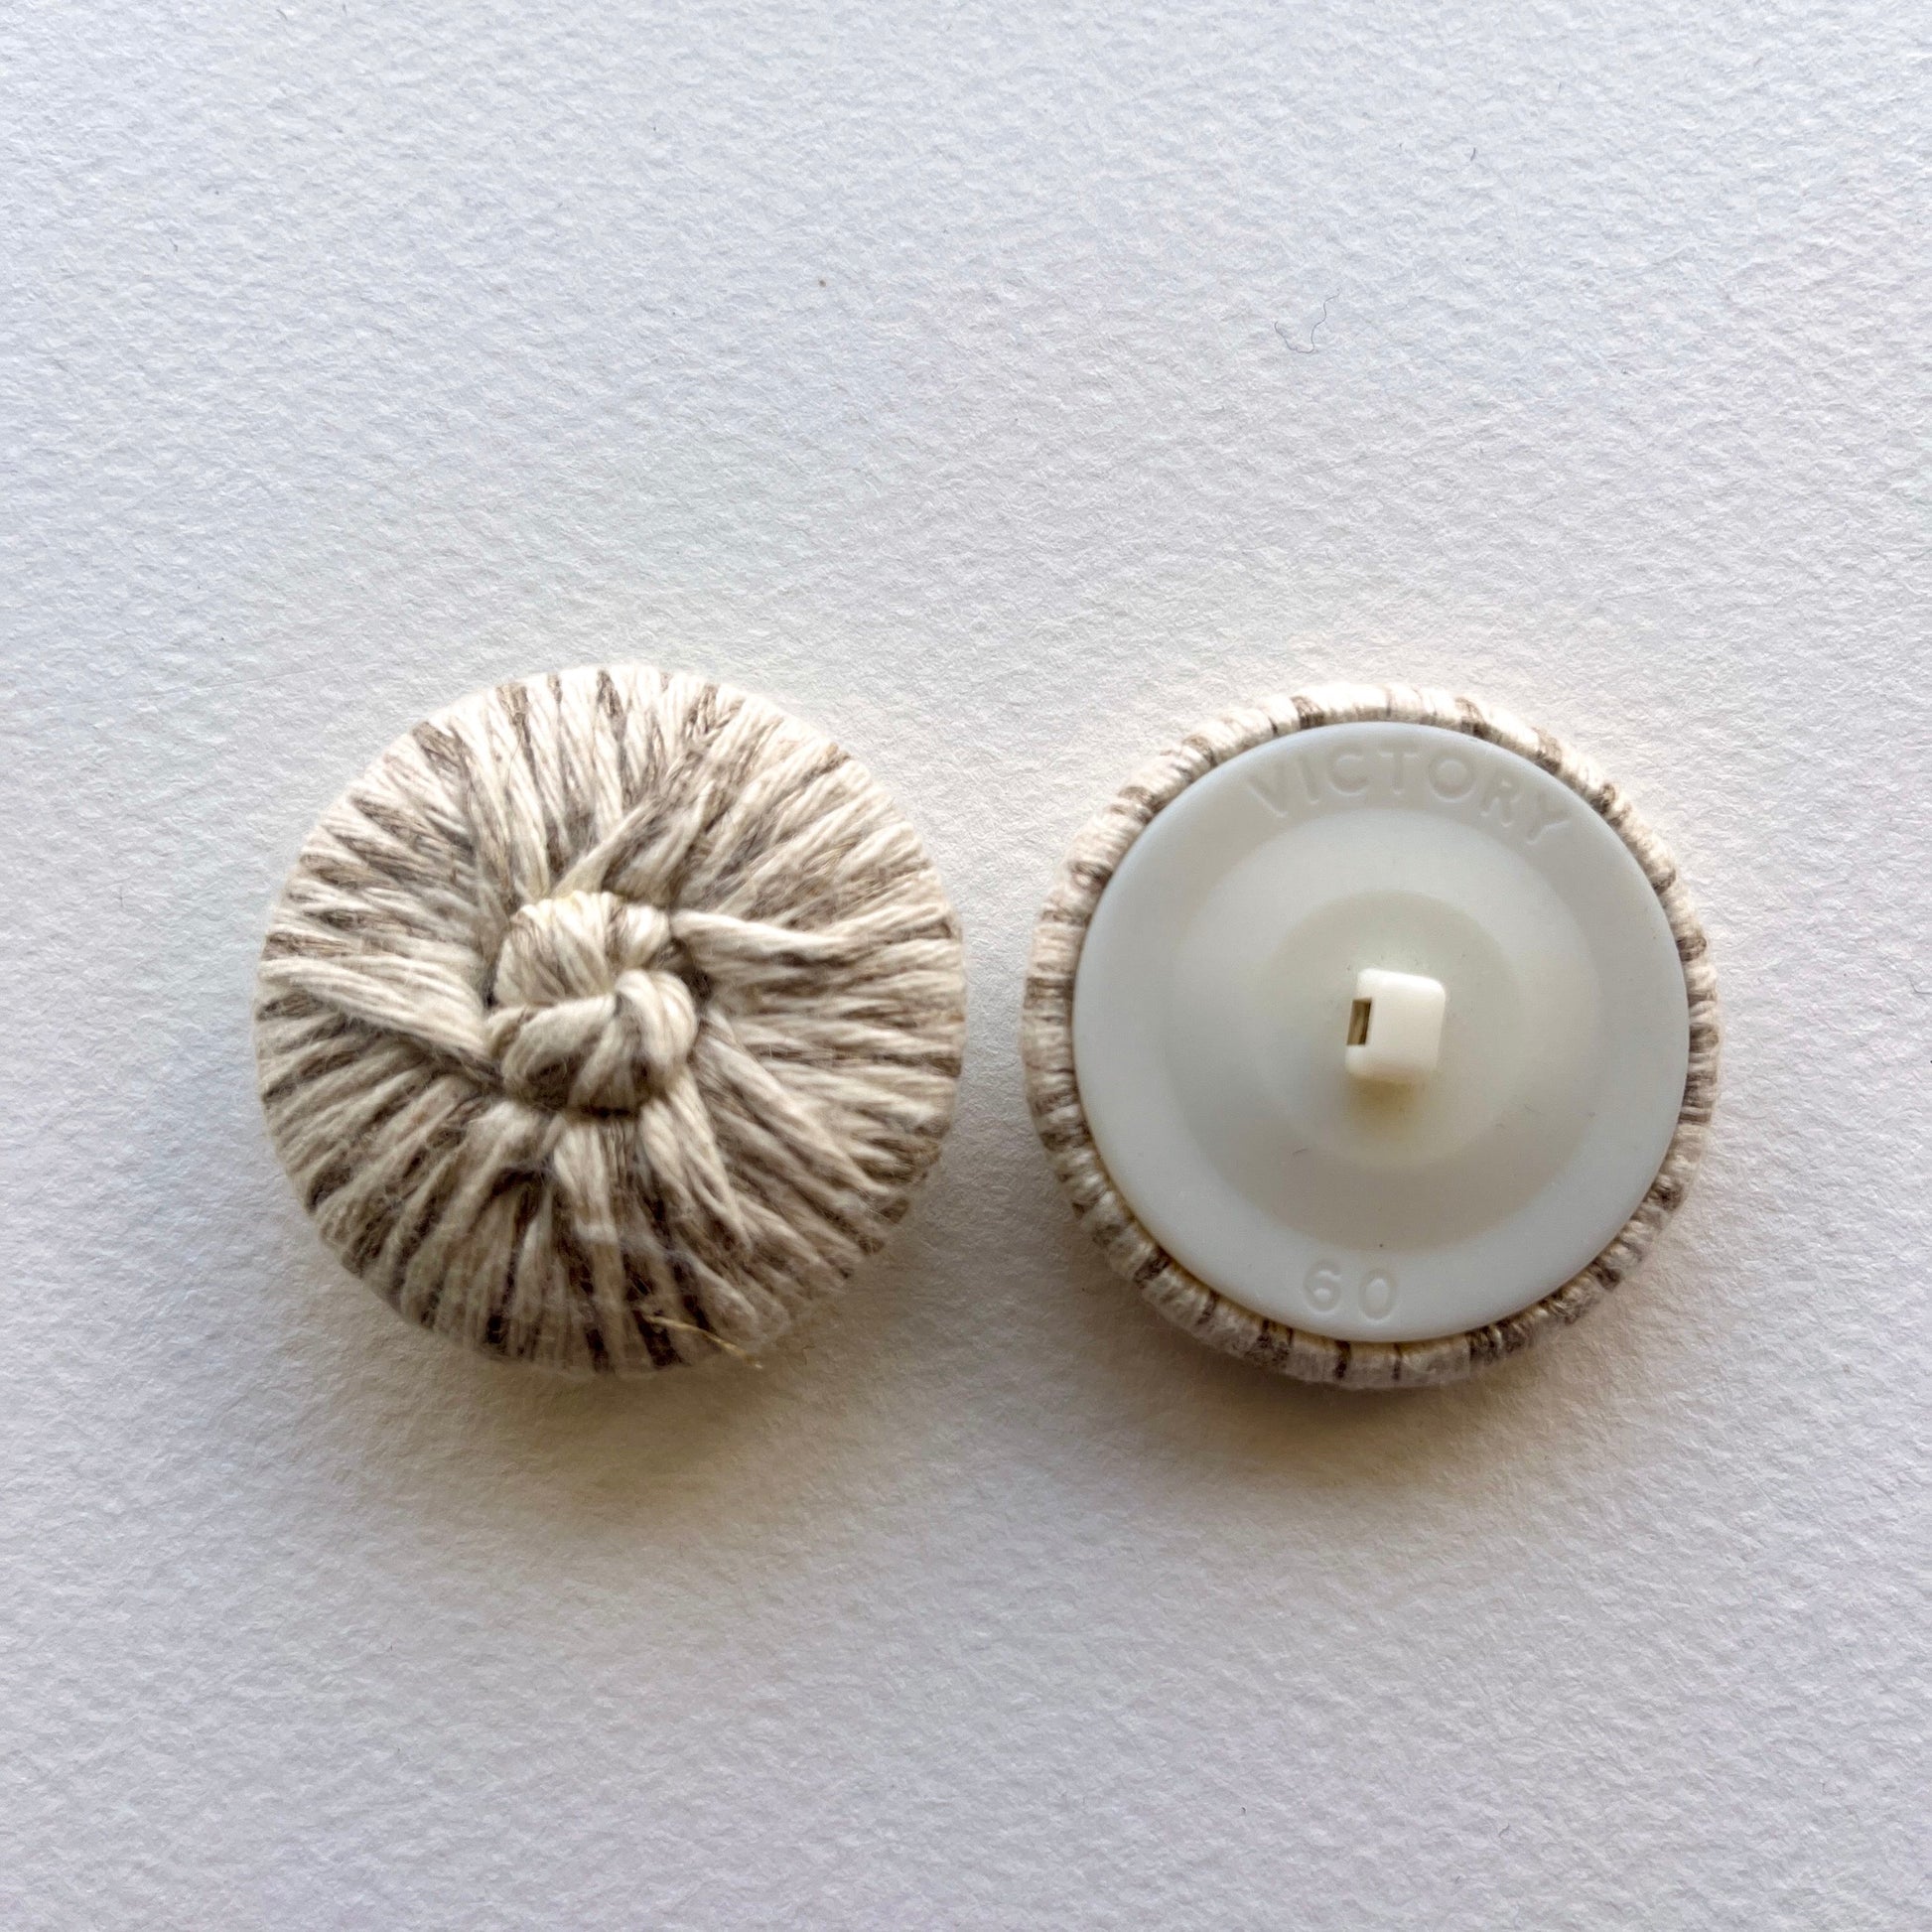 statement button, 2.3cm button, 1" button. brown jacket button, corded button with knitted centres in large sizes. soutache cord button, passementarie buttons, 1980s button, 1940s button Vintage button. Natural colour button, ivory, stone, beige, string colour button